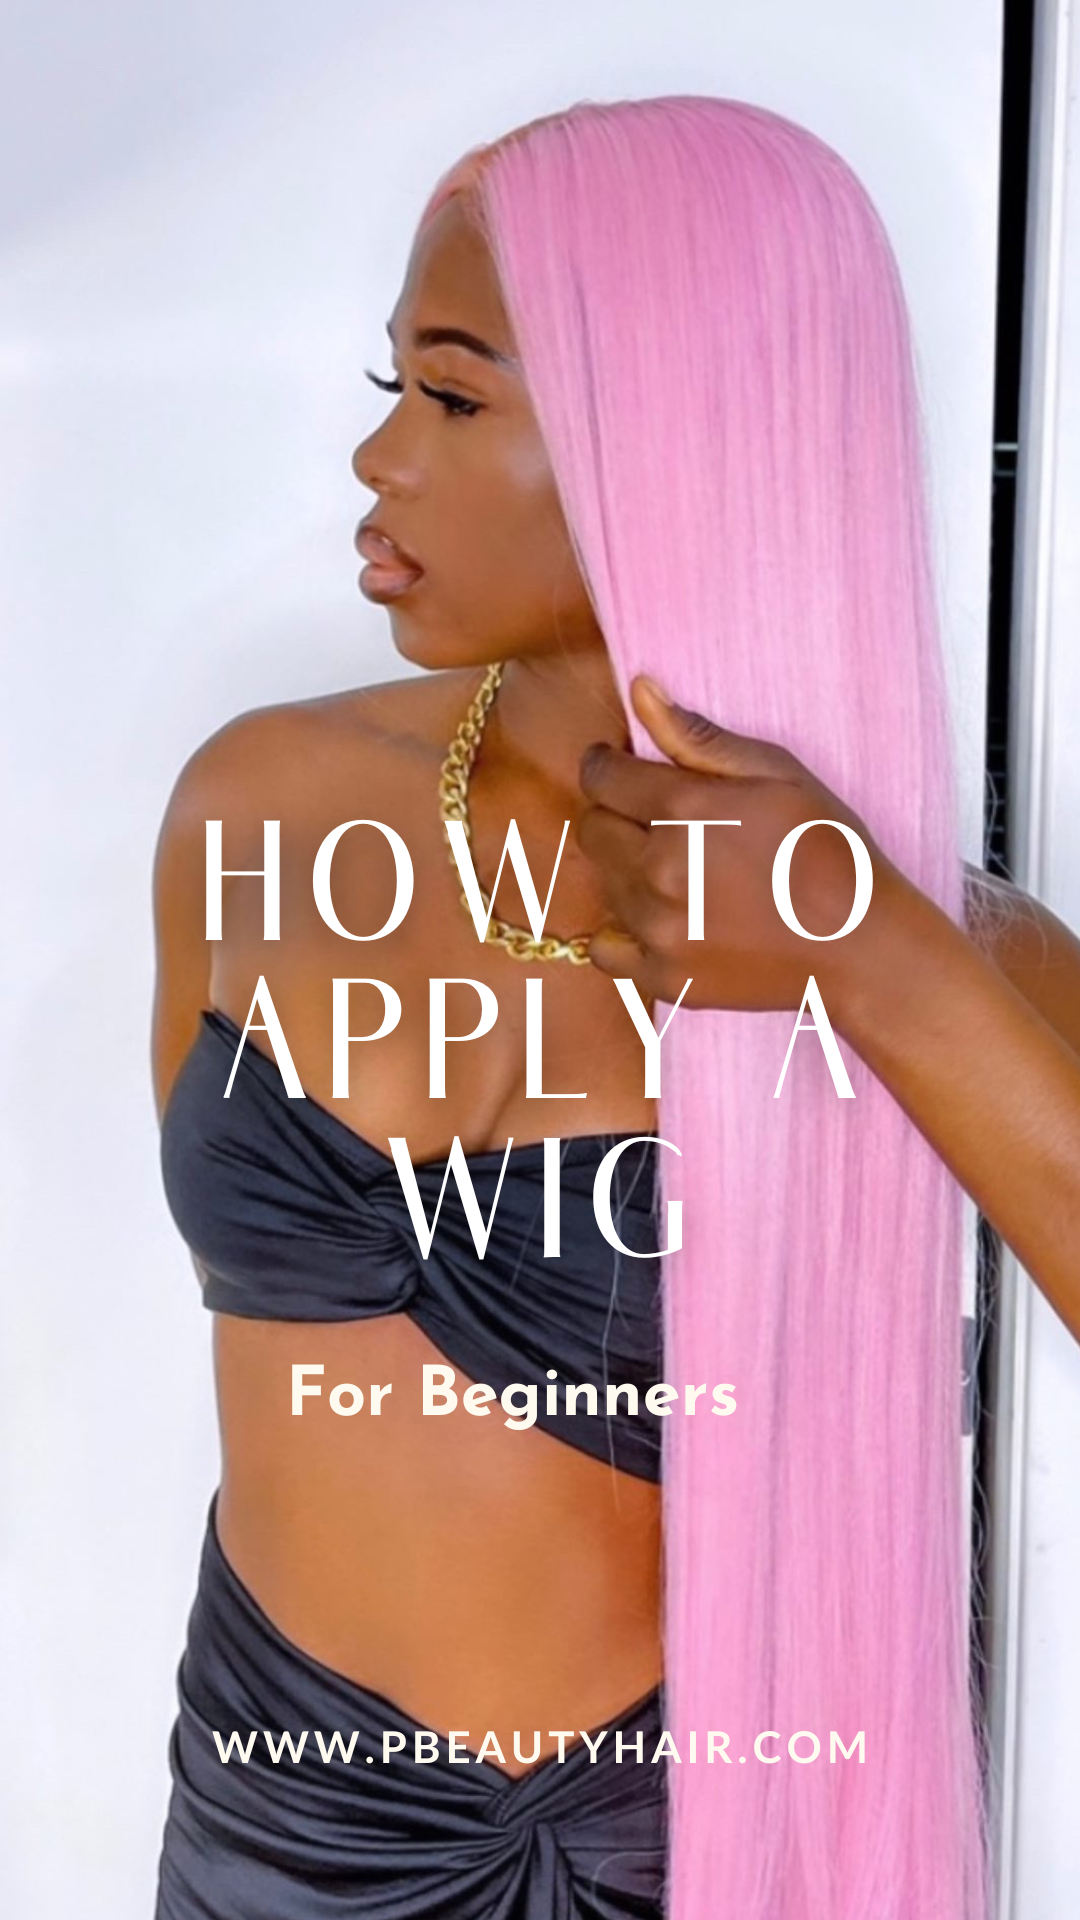 How To Apply A Wig For Begginers - PBeauty Hair